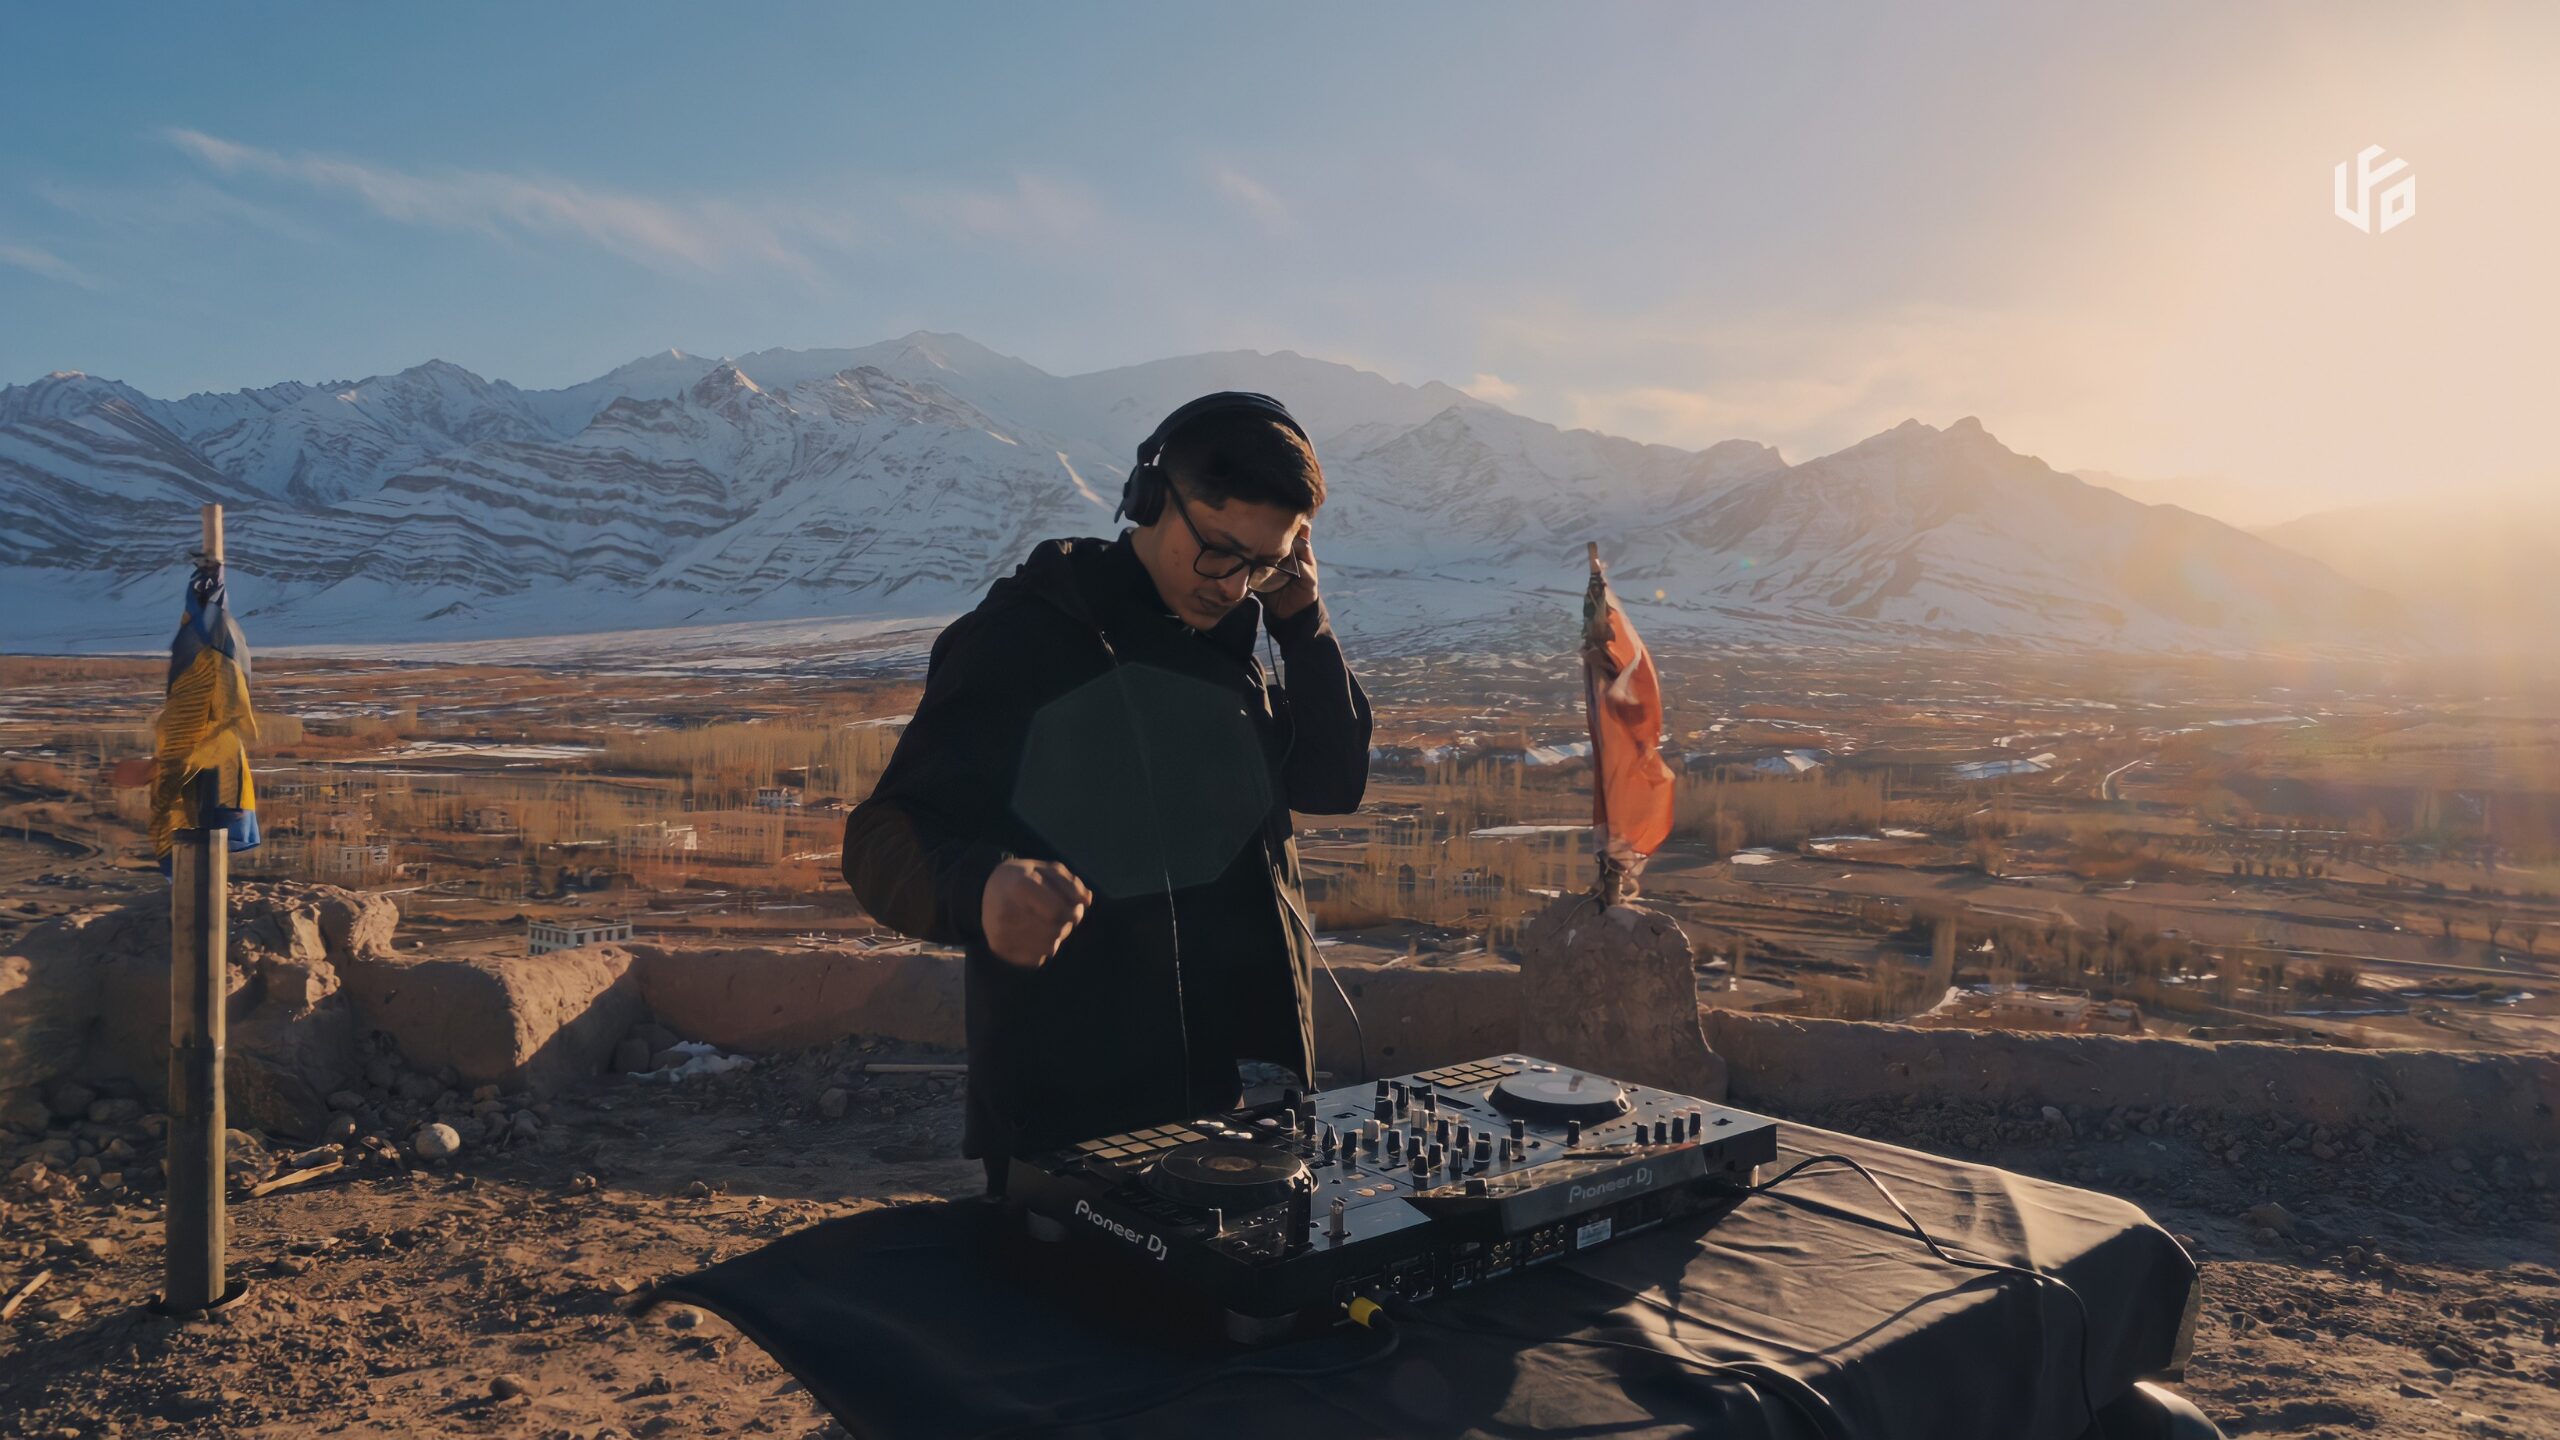 Kaamin Presents The Hideout Vol. 1 Live From Stakna Monastery, Ladakh